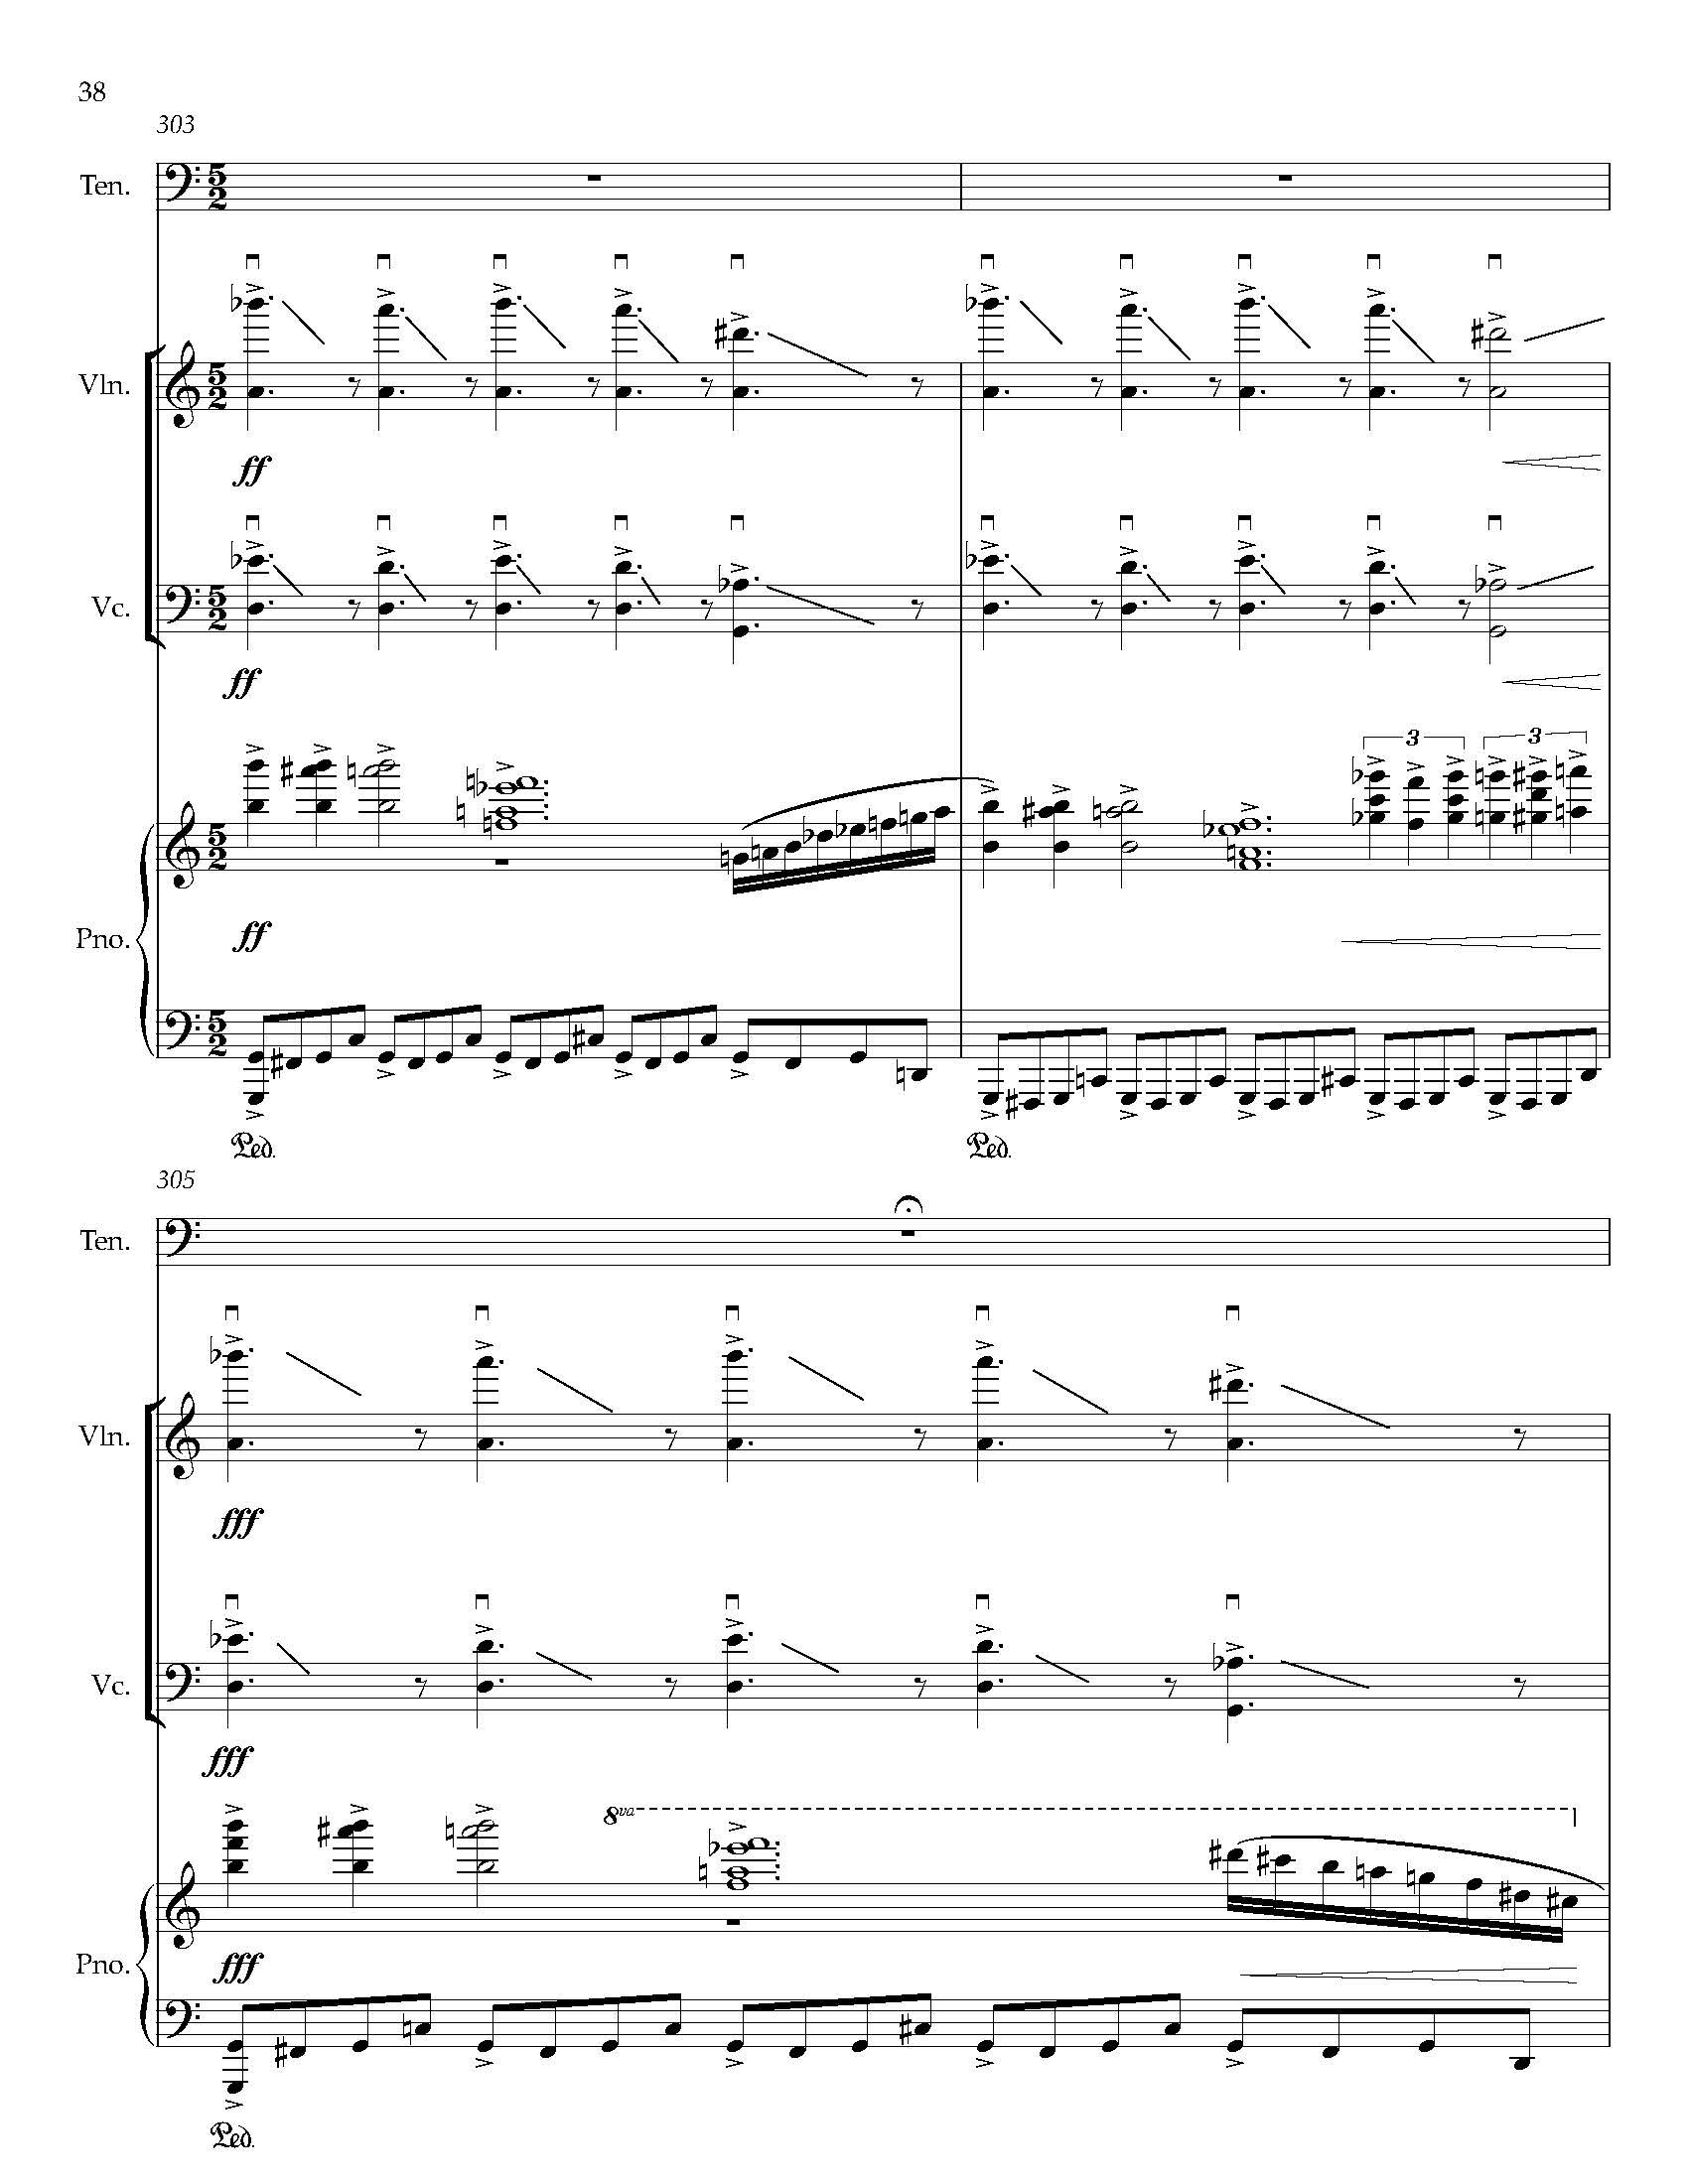 Gursky Songs - Complete Score_Page_46.jpg